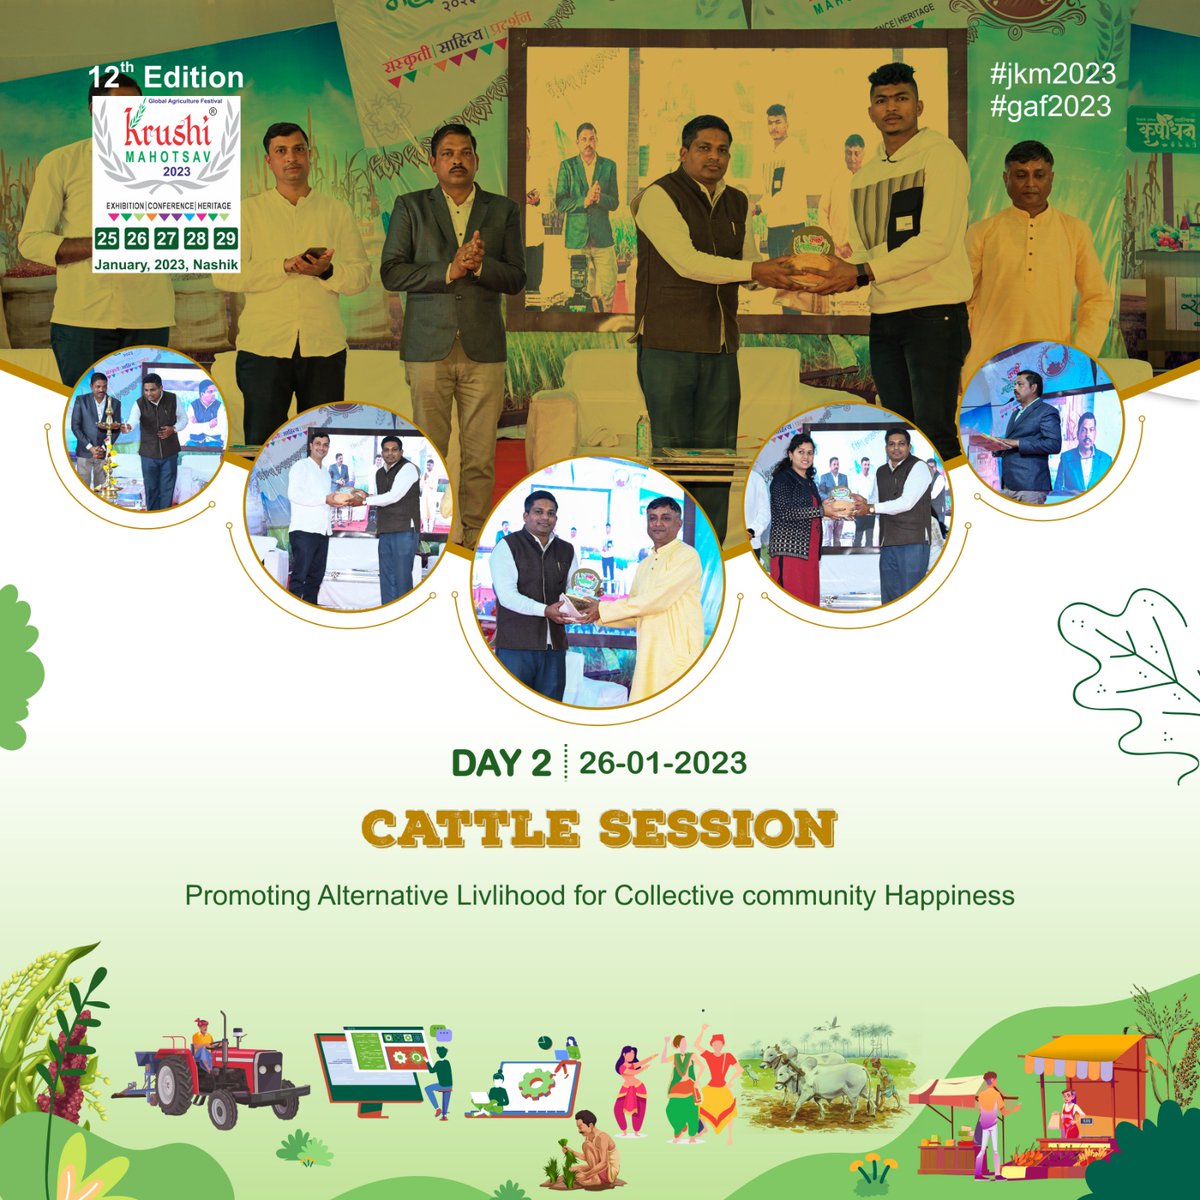 Cattle  Session 
Day 2

#JKM2023 #GAF2023 #12thEditionKrushiMahotsav #JagtikKrushiMahotsav2023 #KrushiMahotsav2023 #AgricultureFestival #AgricultureExhibition #FoodProcessingExhibition #WellnessExhibition #SustainableAgriculture #AgricultureEco #opportunity #culture #business